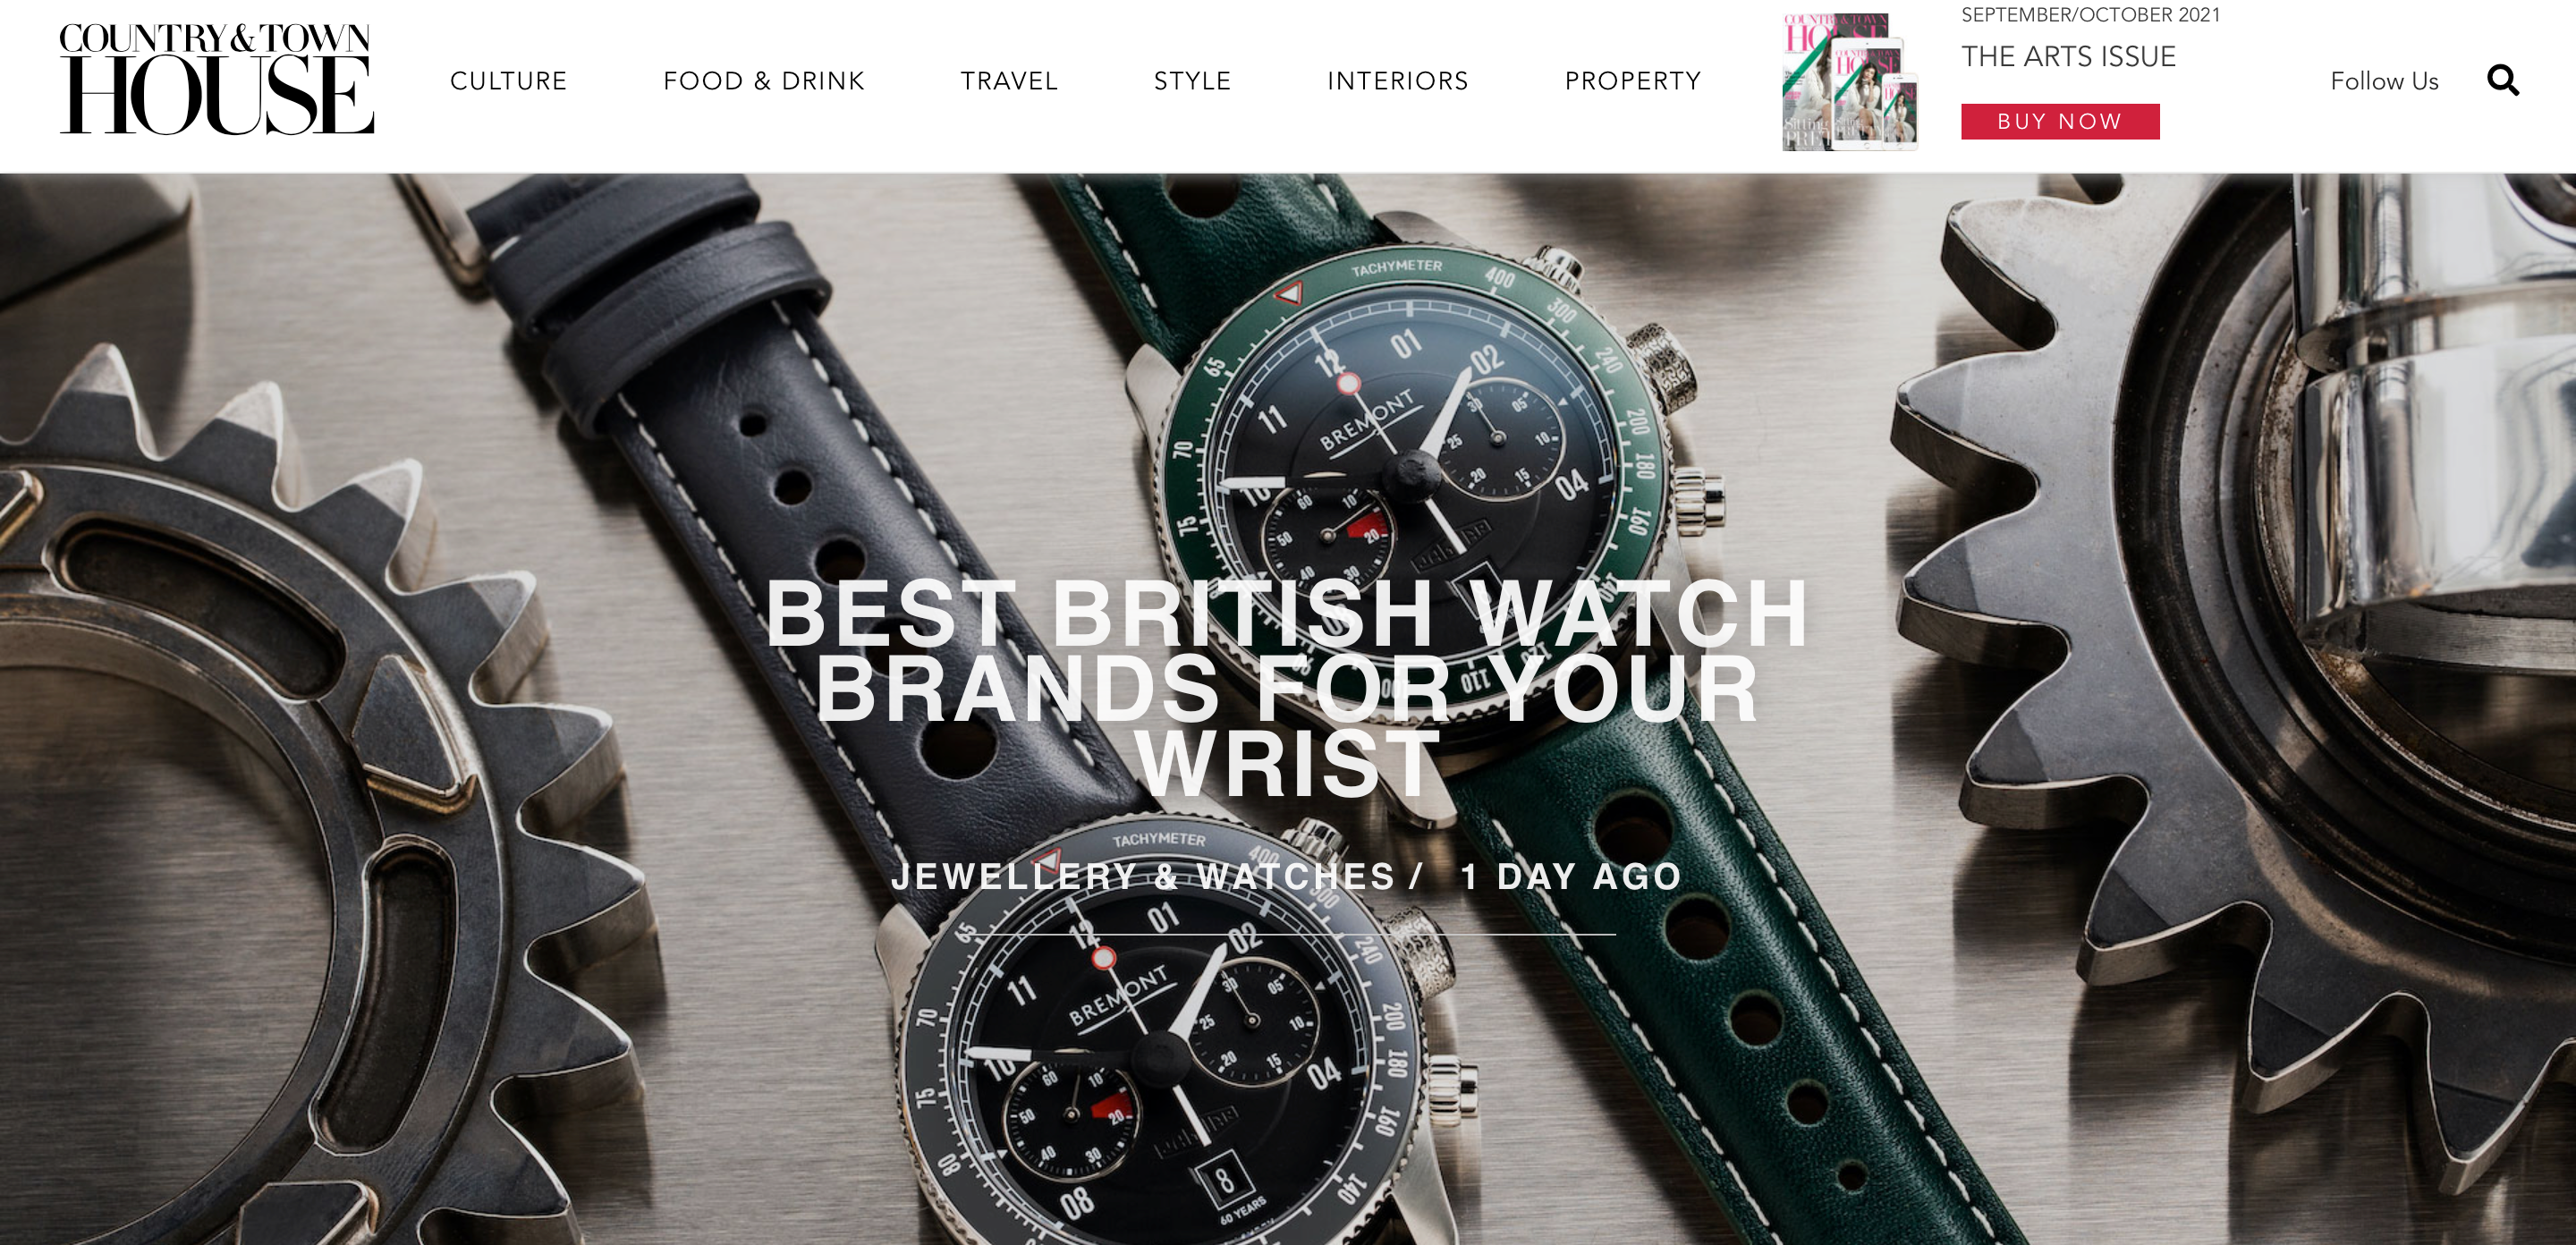 Country and Town House - Best British Watches